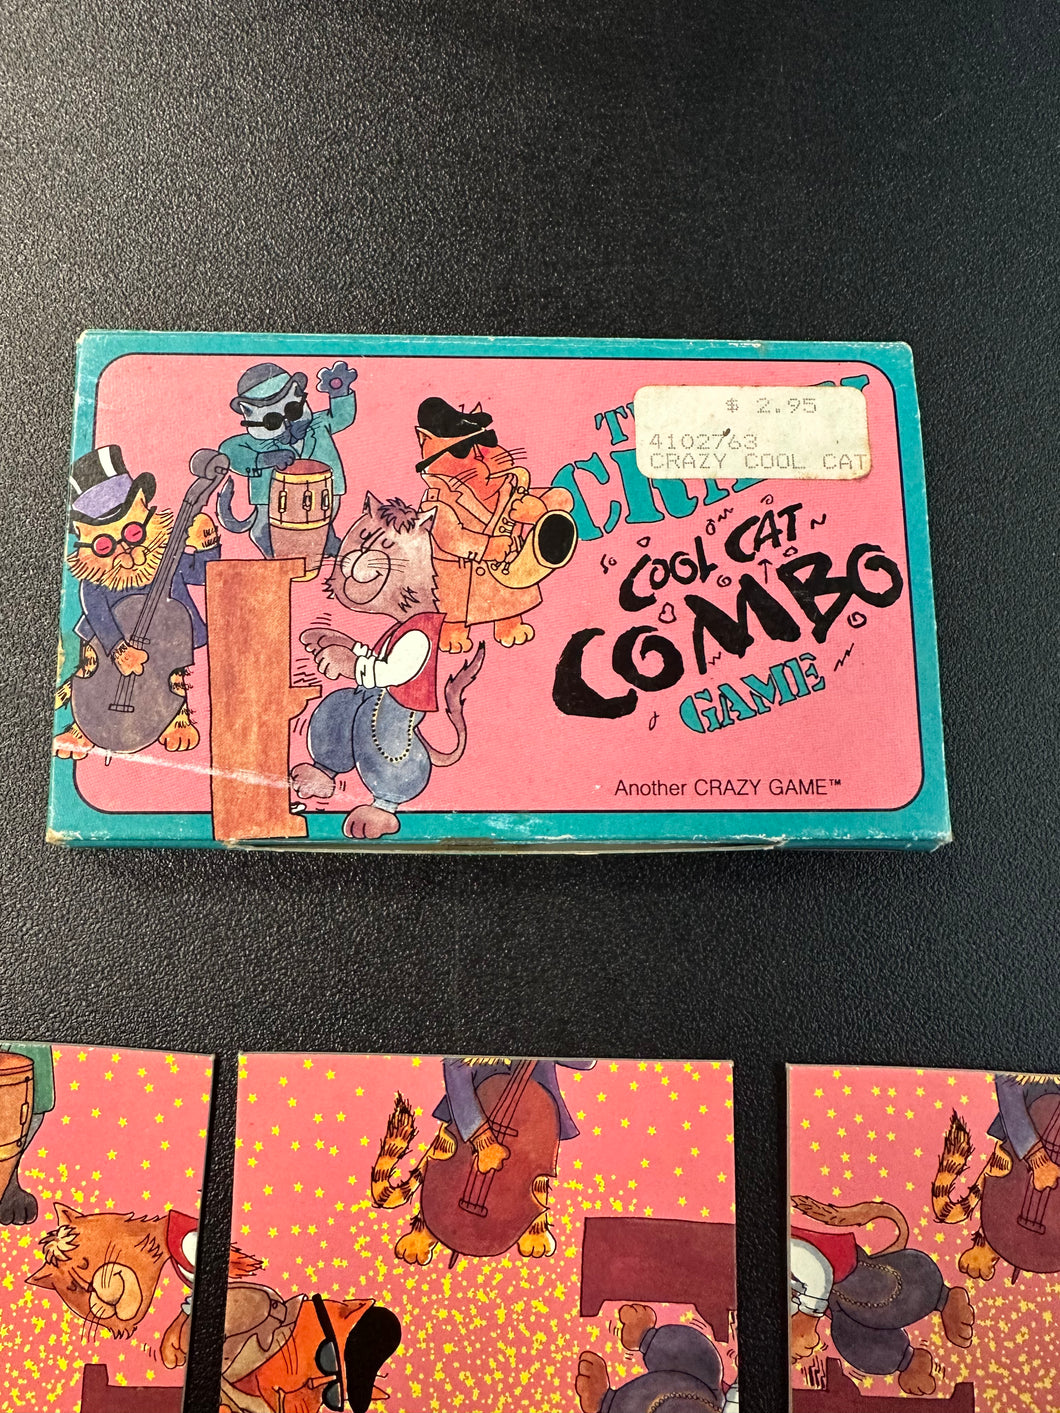 Cool Cat Combo Game Preowned